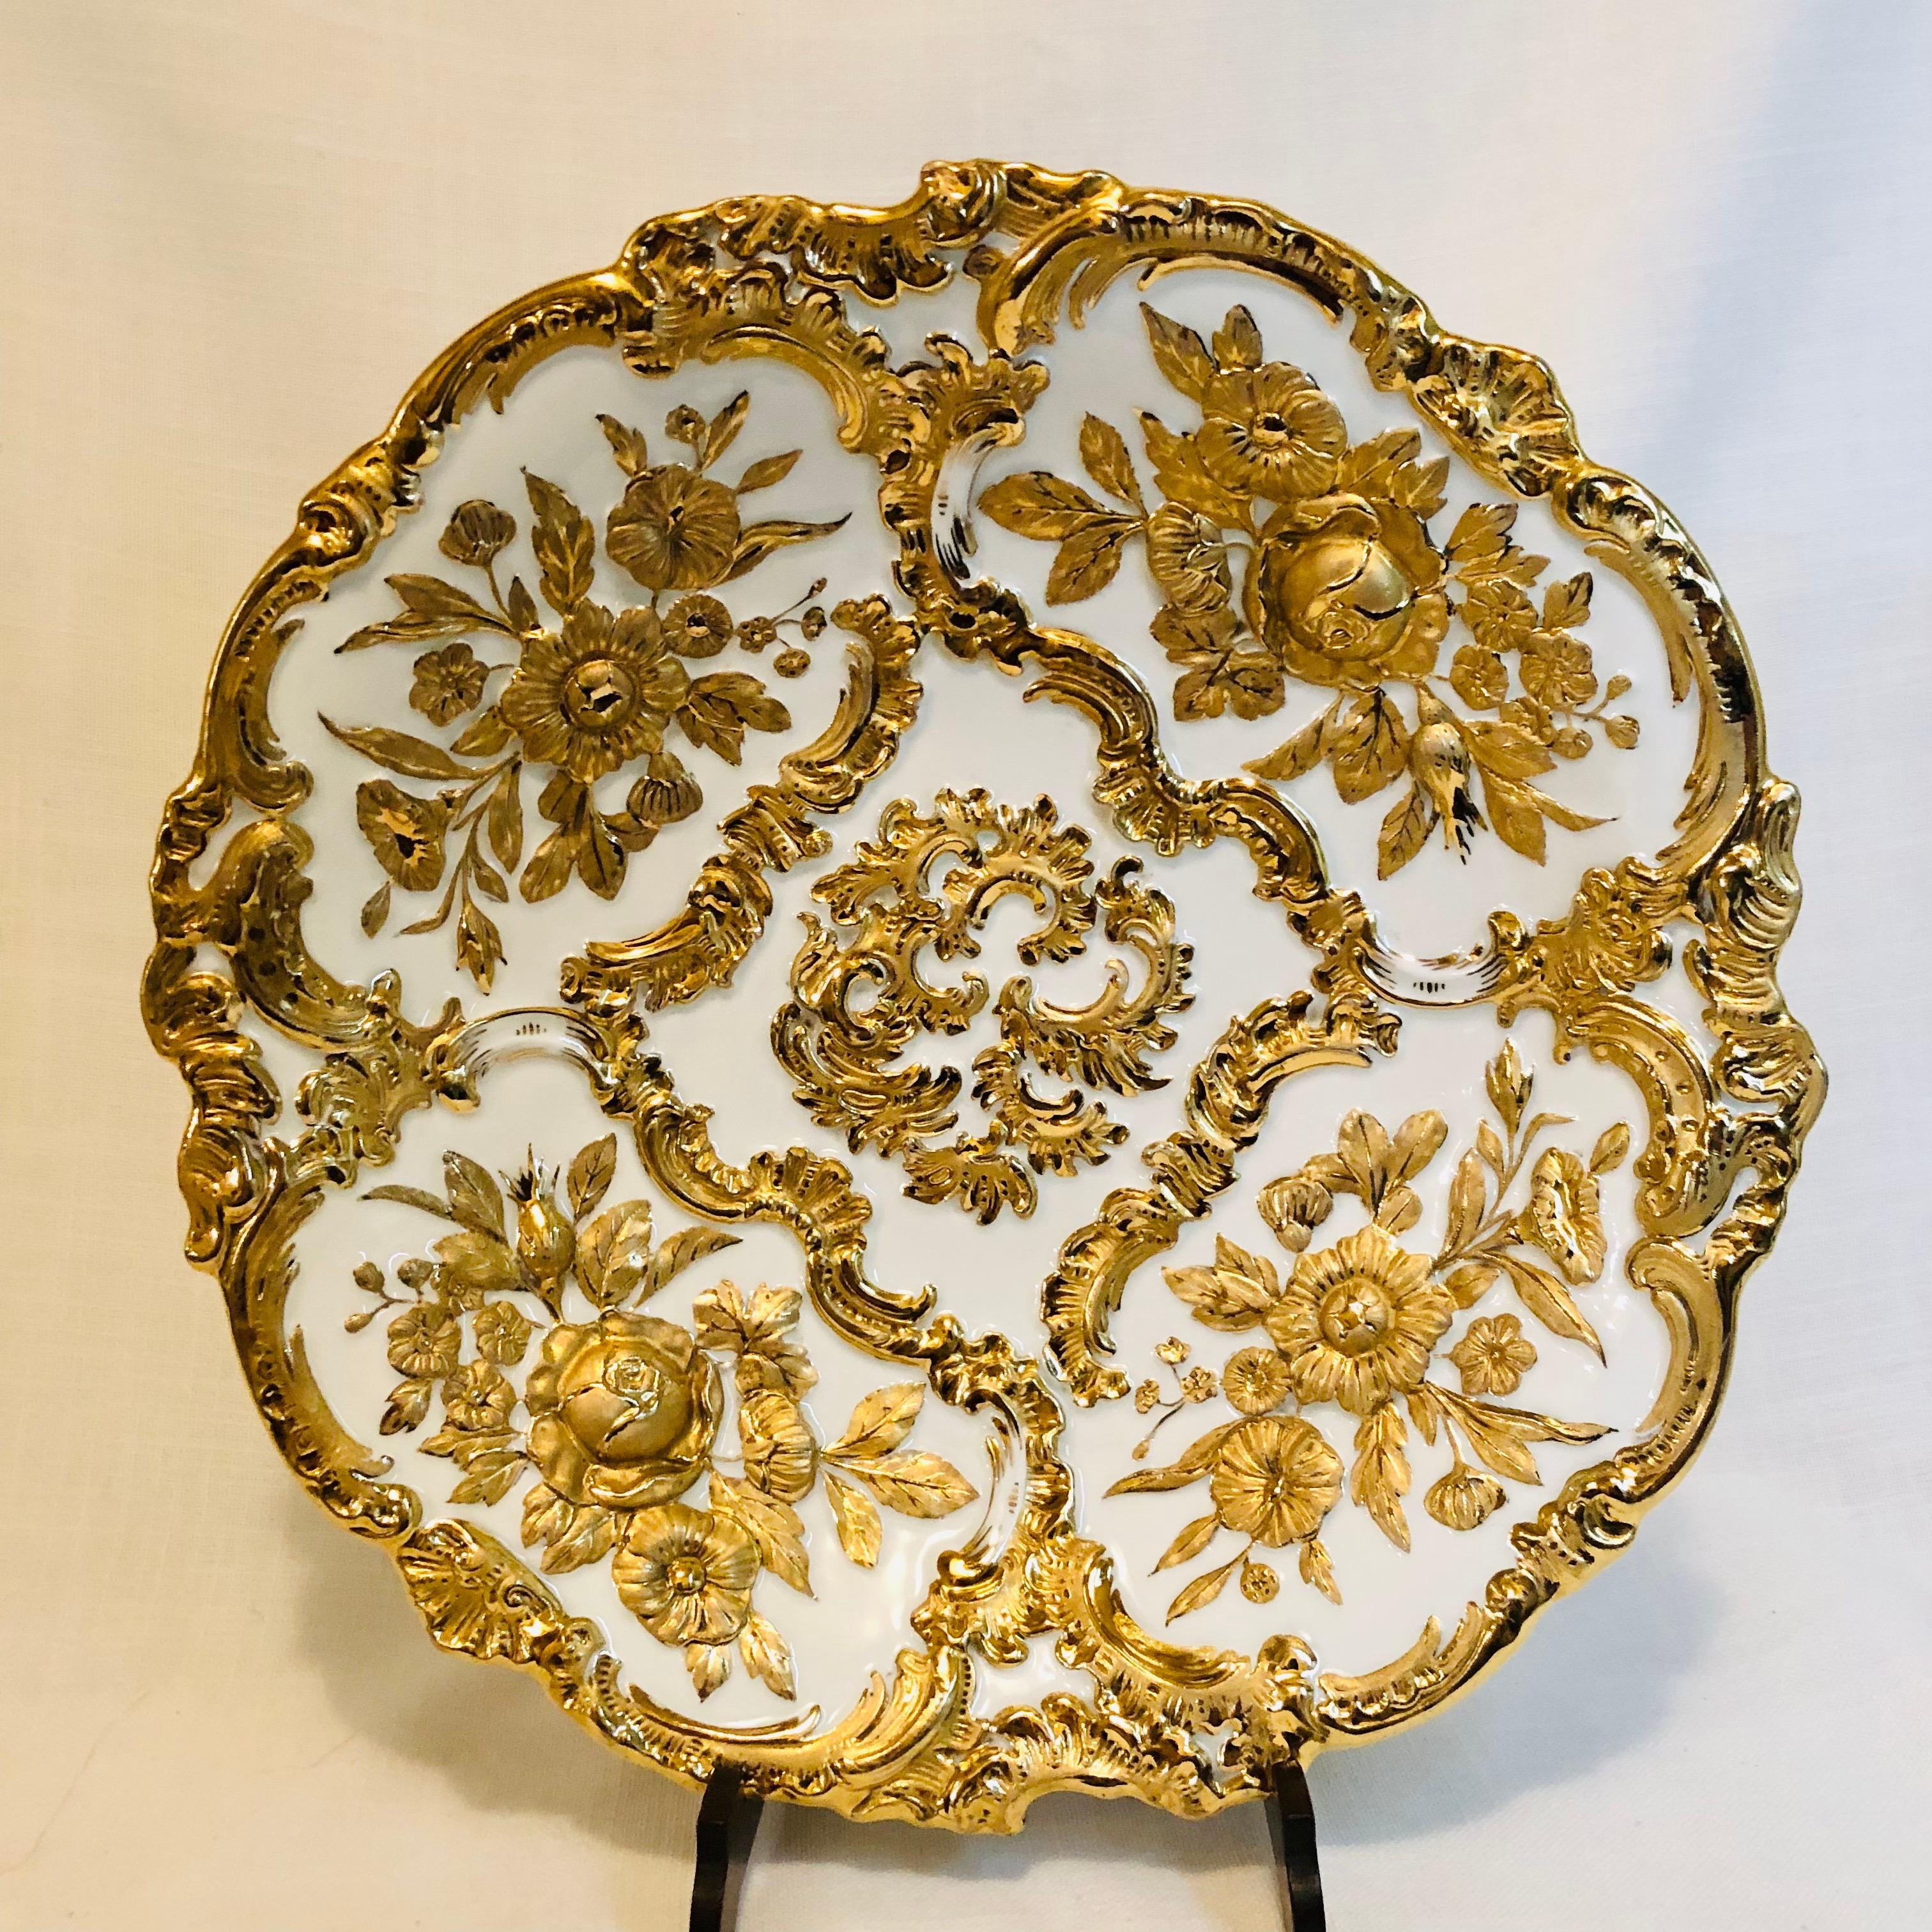 Gilt Meissen Charger With Raised Gilded Flowers & Leaves and Elaborate Gilded Accents